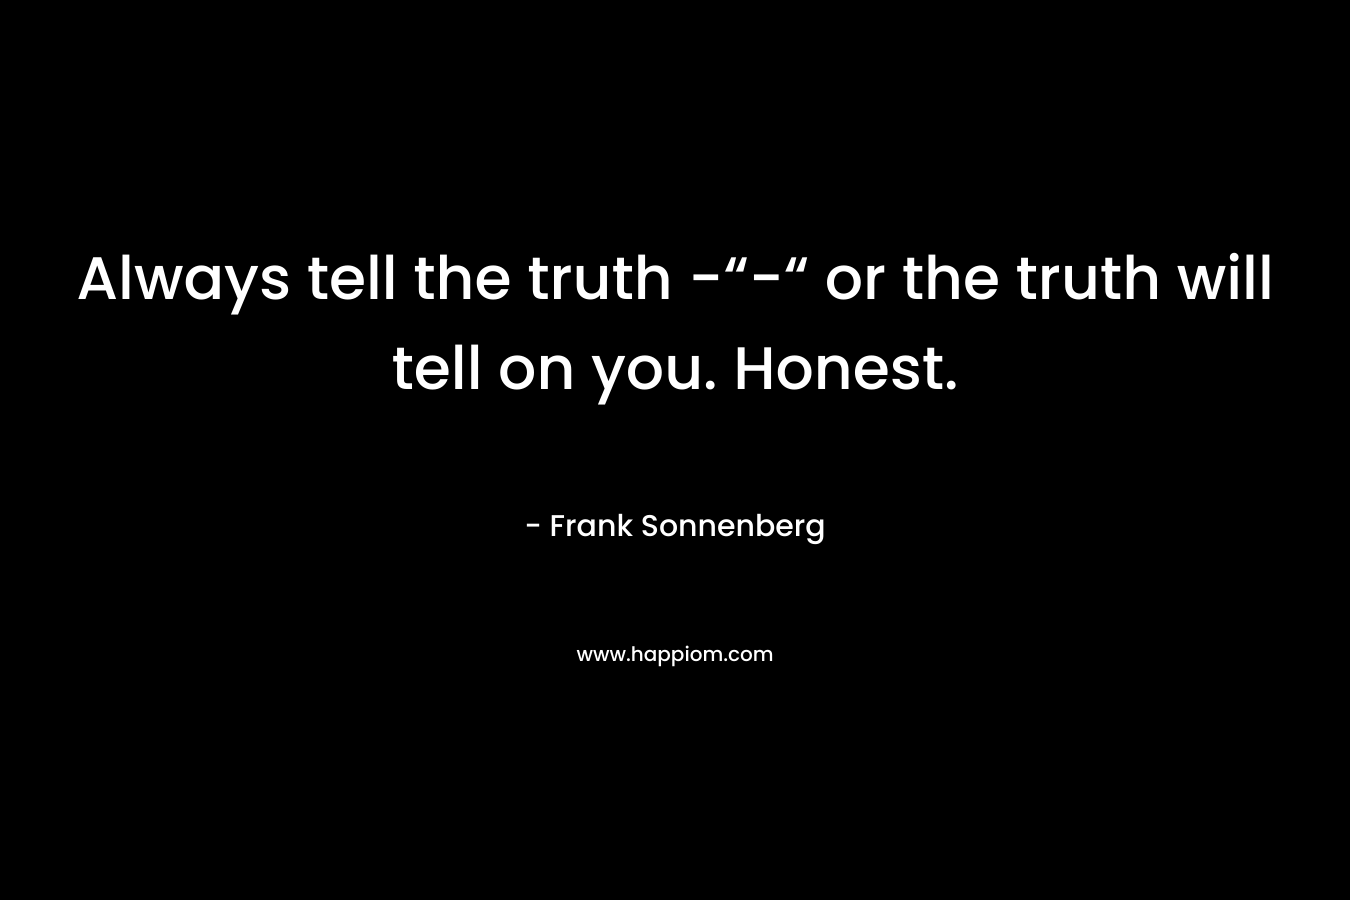 Always tell the truth -“-“ or the truth will tell on you. Honest.